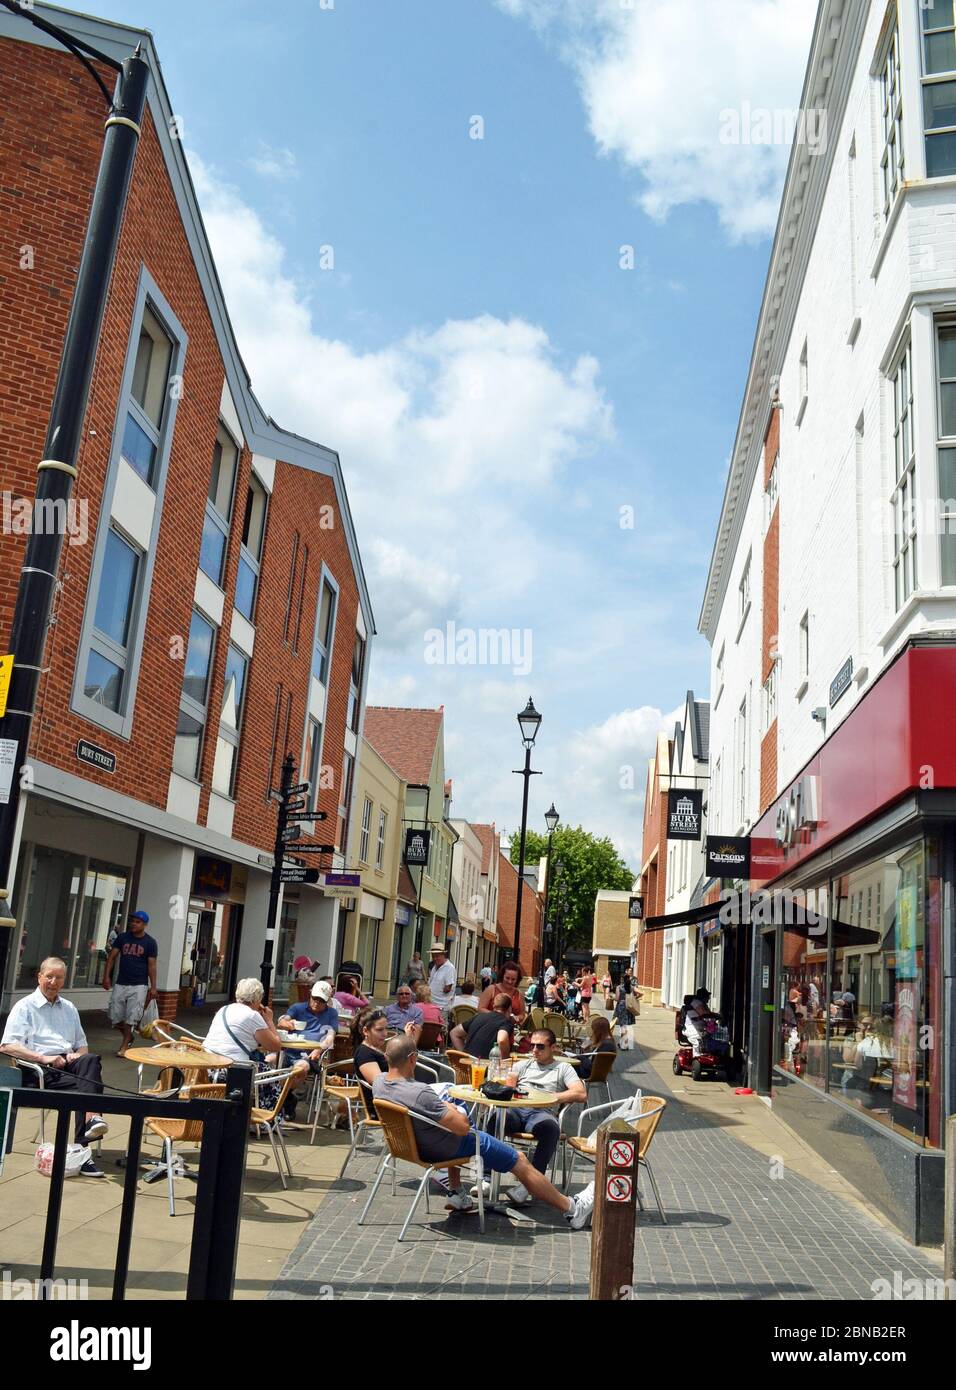 People outside a coffee shop or cafe in Abingdon town centre, Oxfordshire, UK Stock Photo